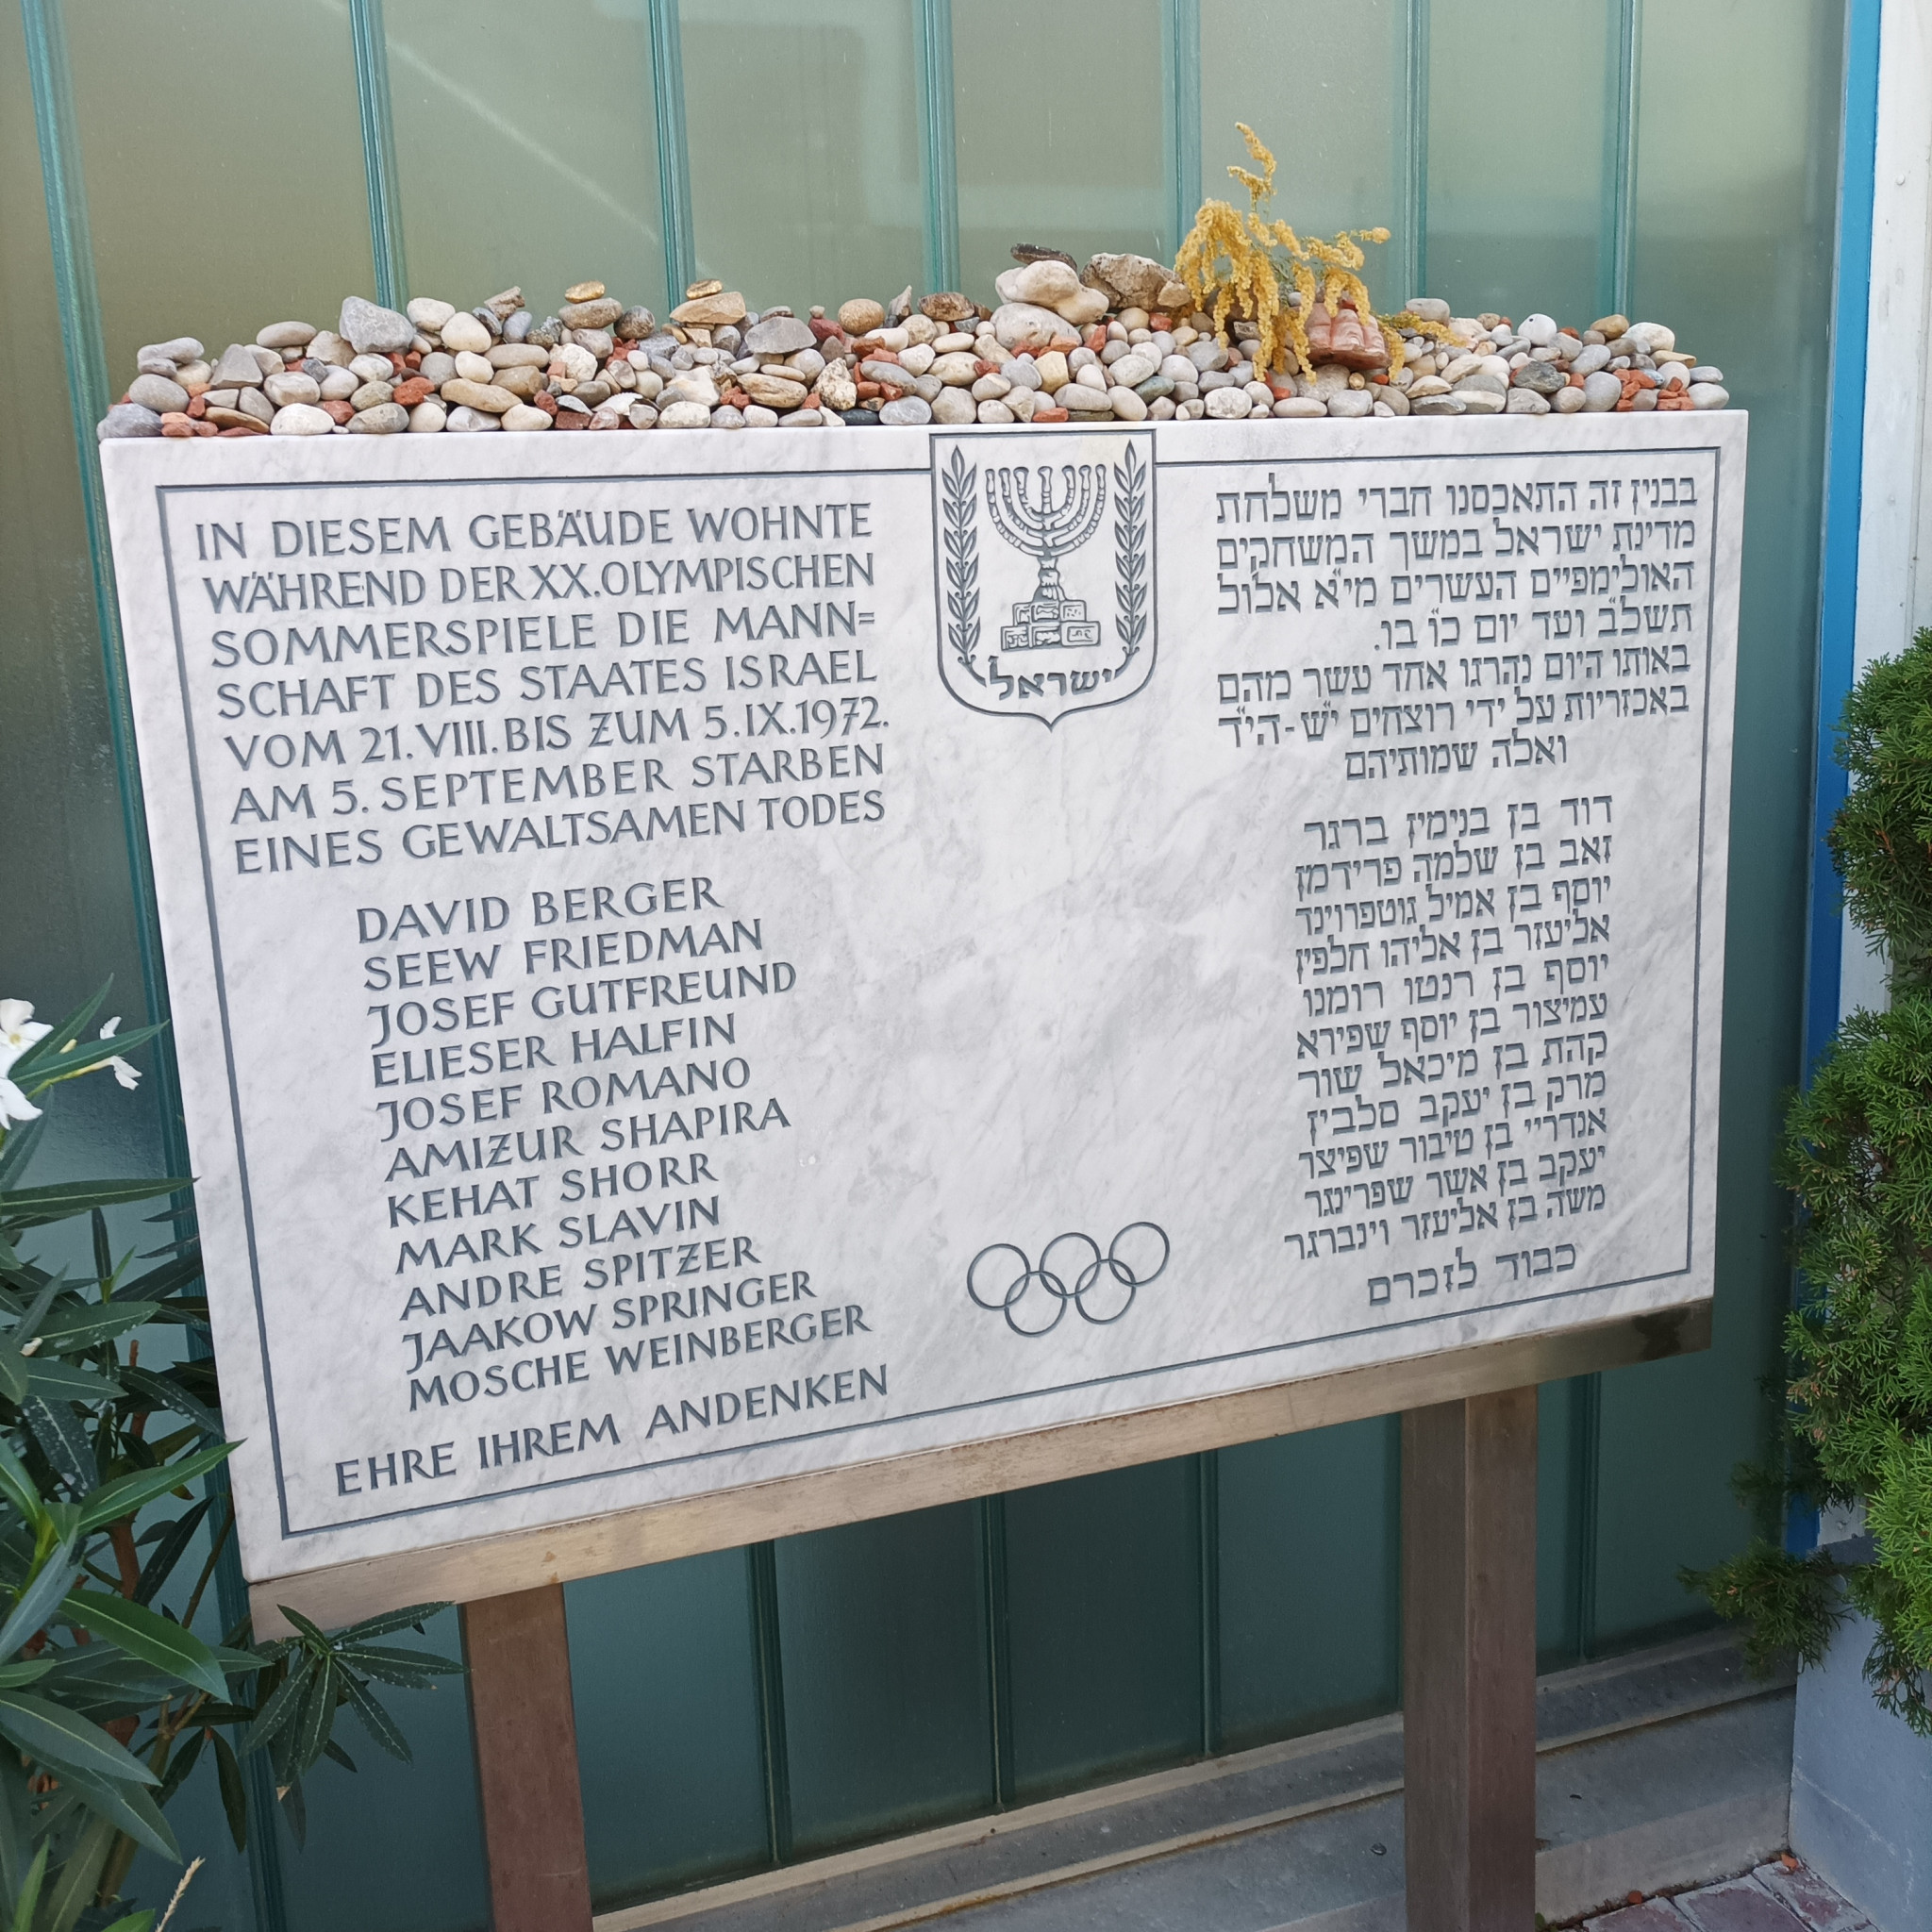 A memorial in what was the Olympic village pays tribute to those who died in the attack ©ITG